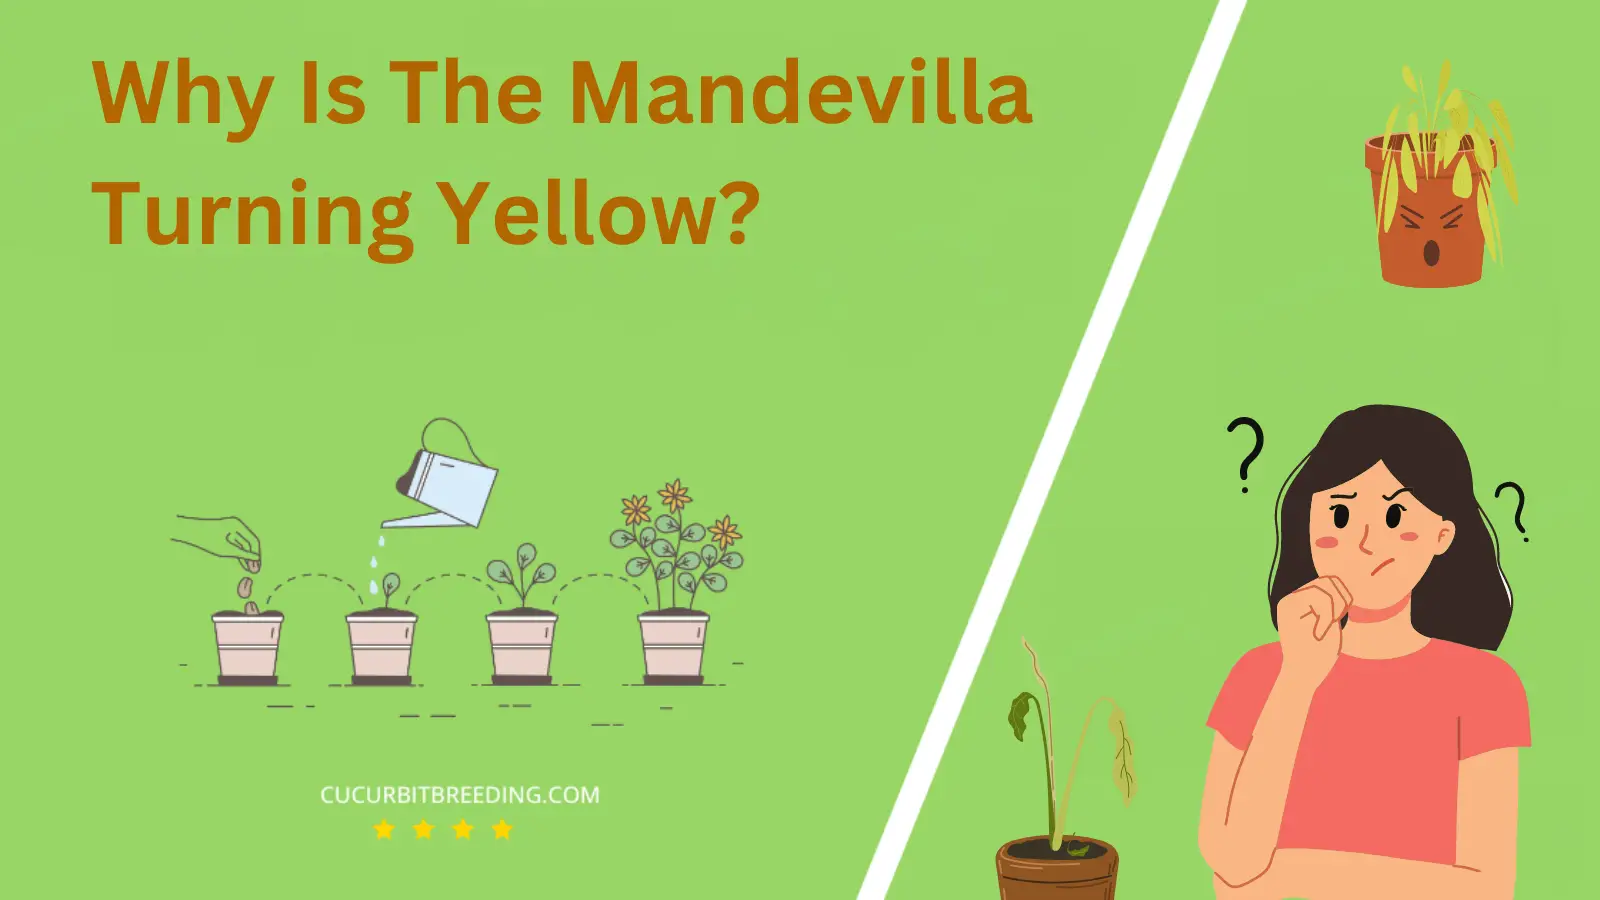 Why Is The Mandevilla Turning Yellow